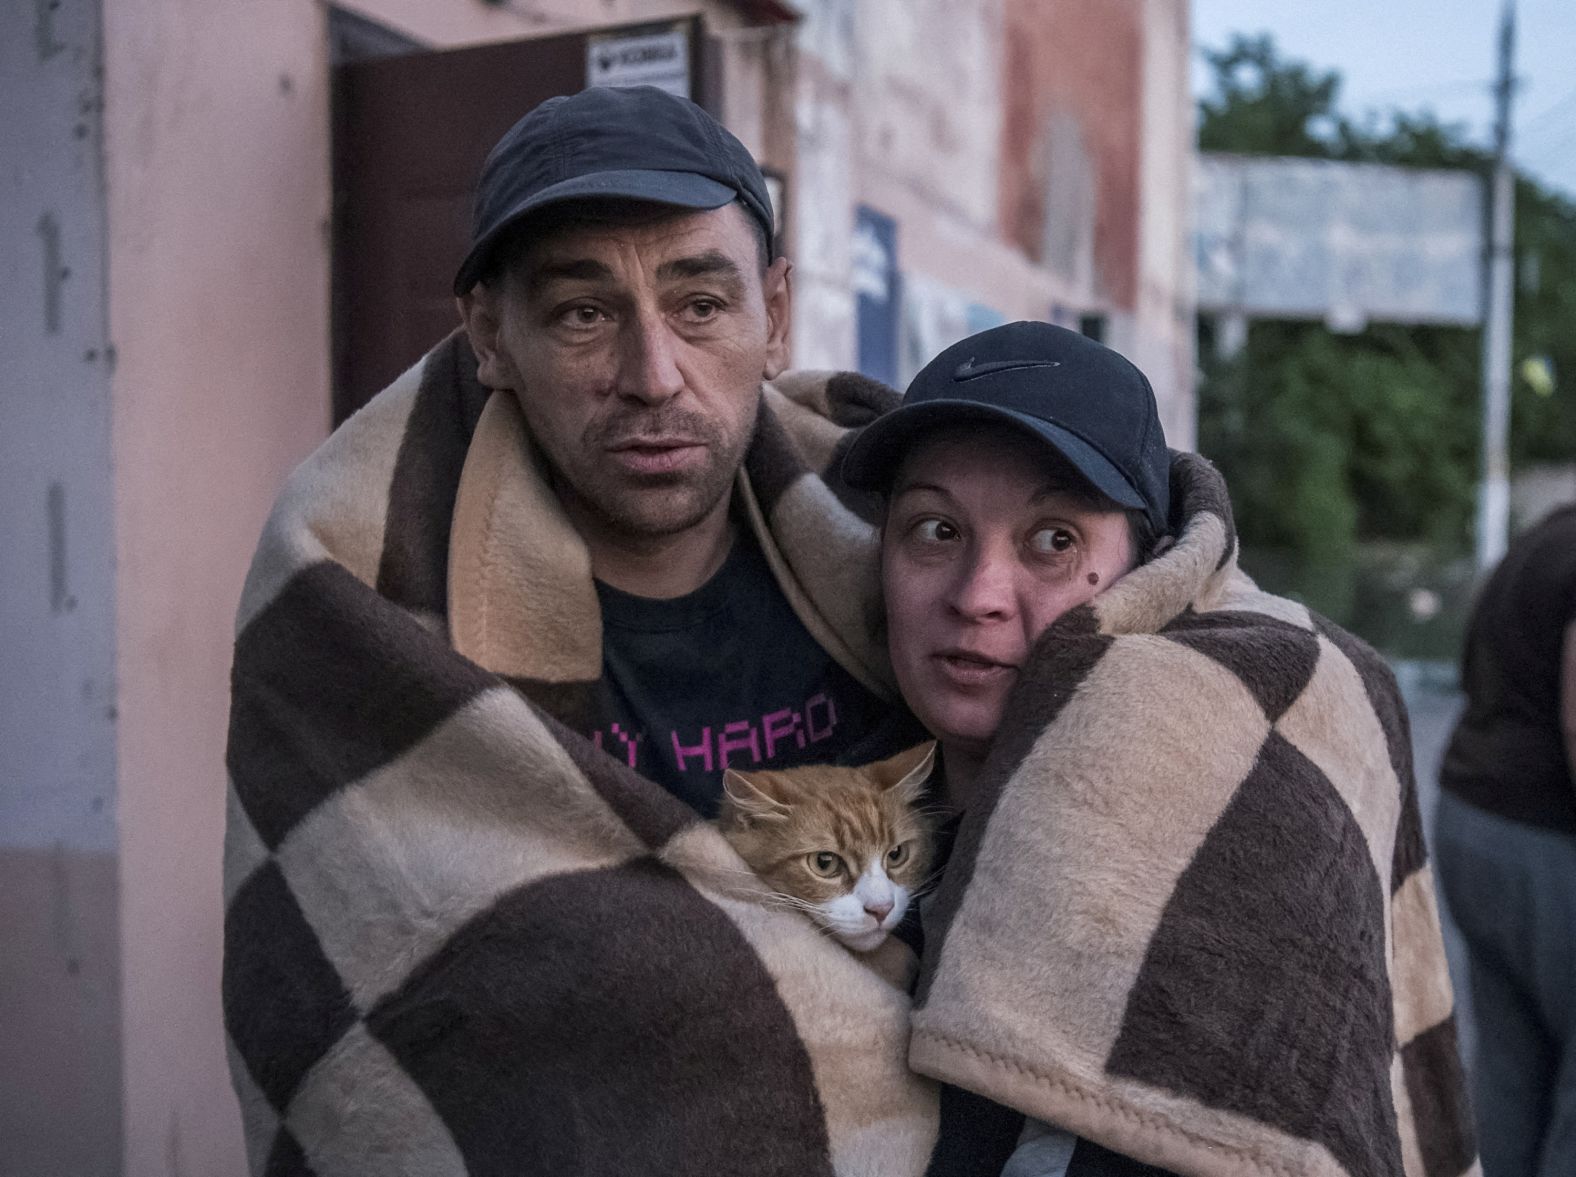 Local residents after an evacuation of a flooded area in Kherson.